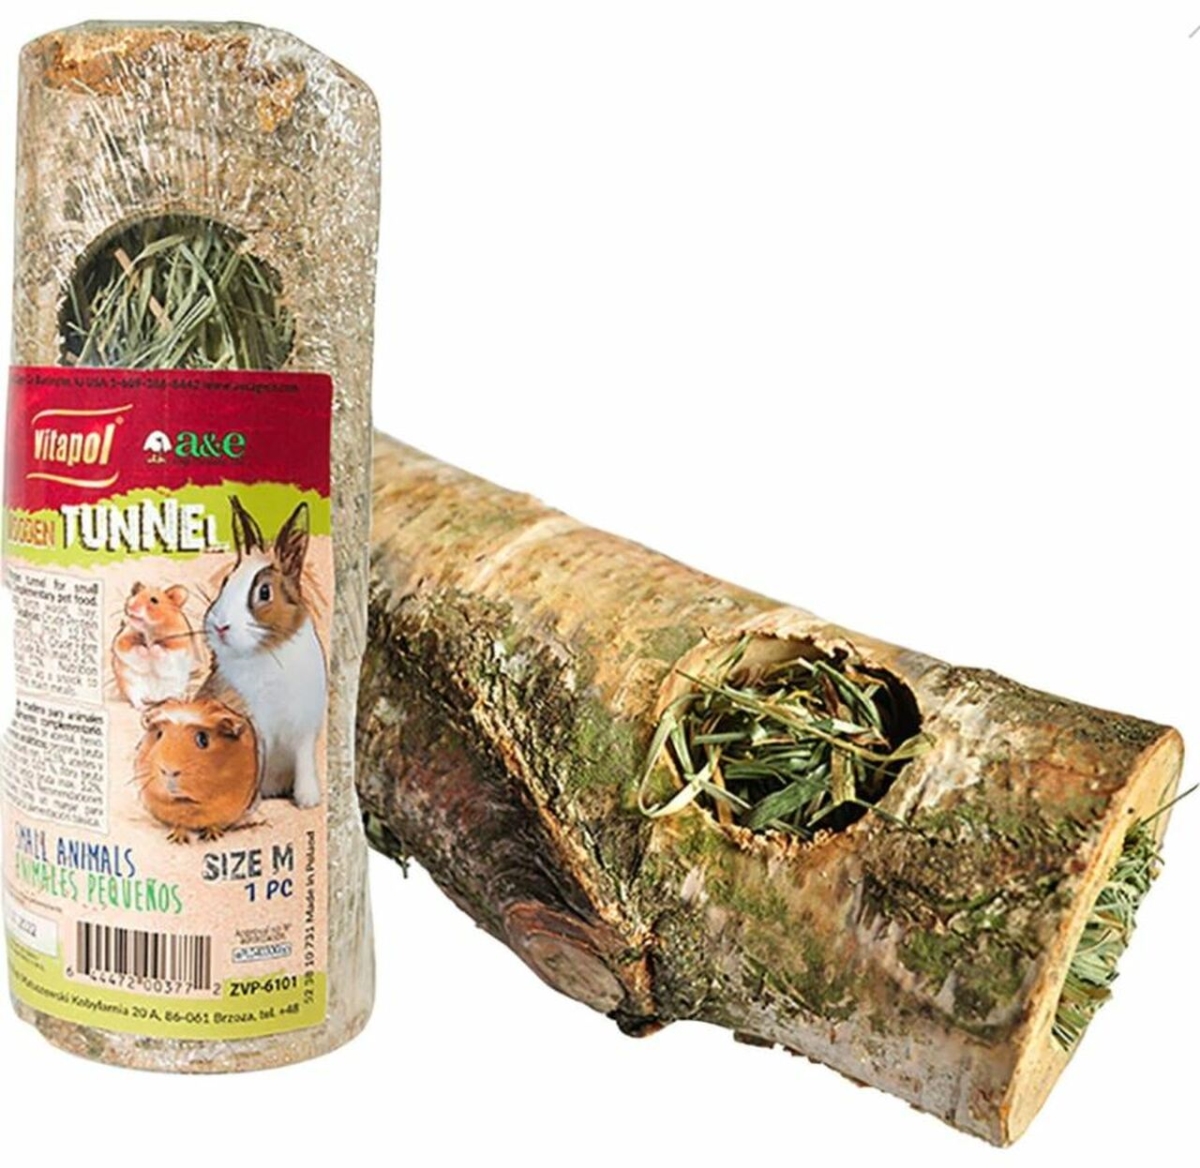 Picture of A&E Cage 644146 Vitapol Small Animal Wood Tunnel with Hay - Medium